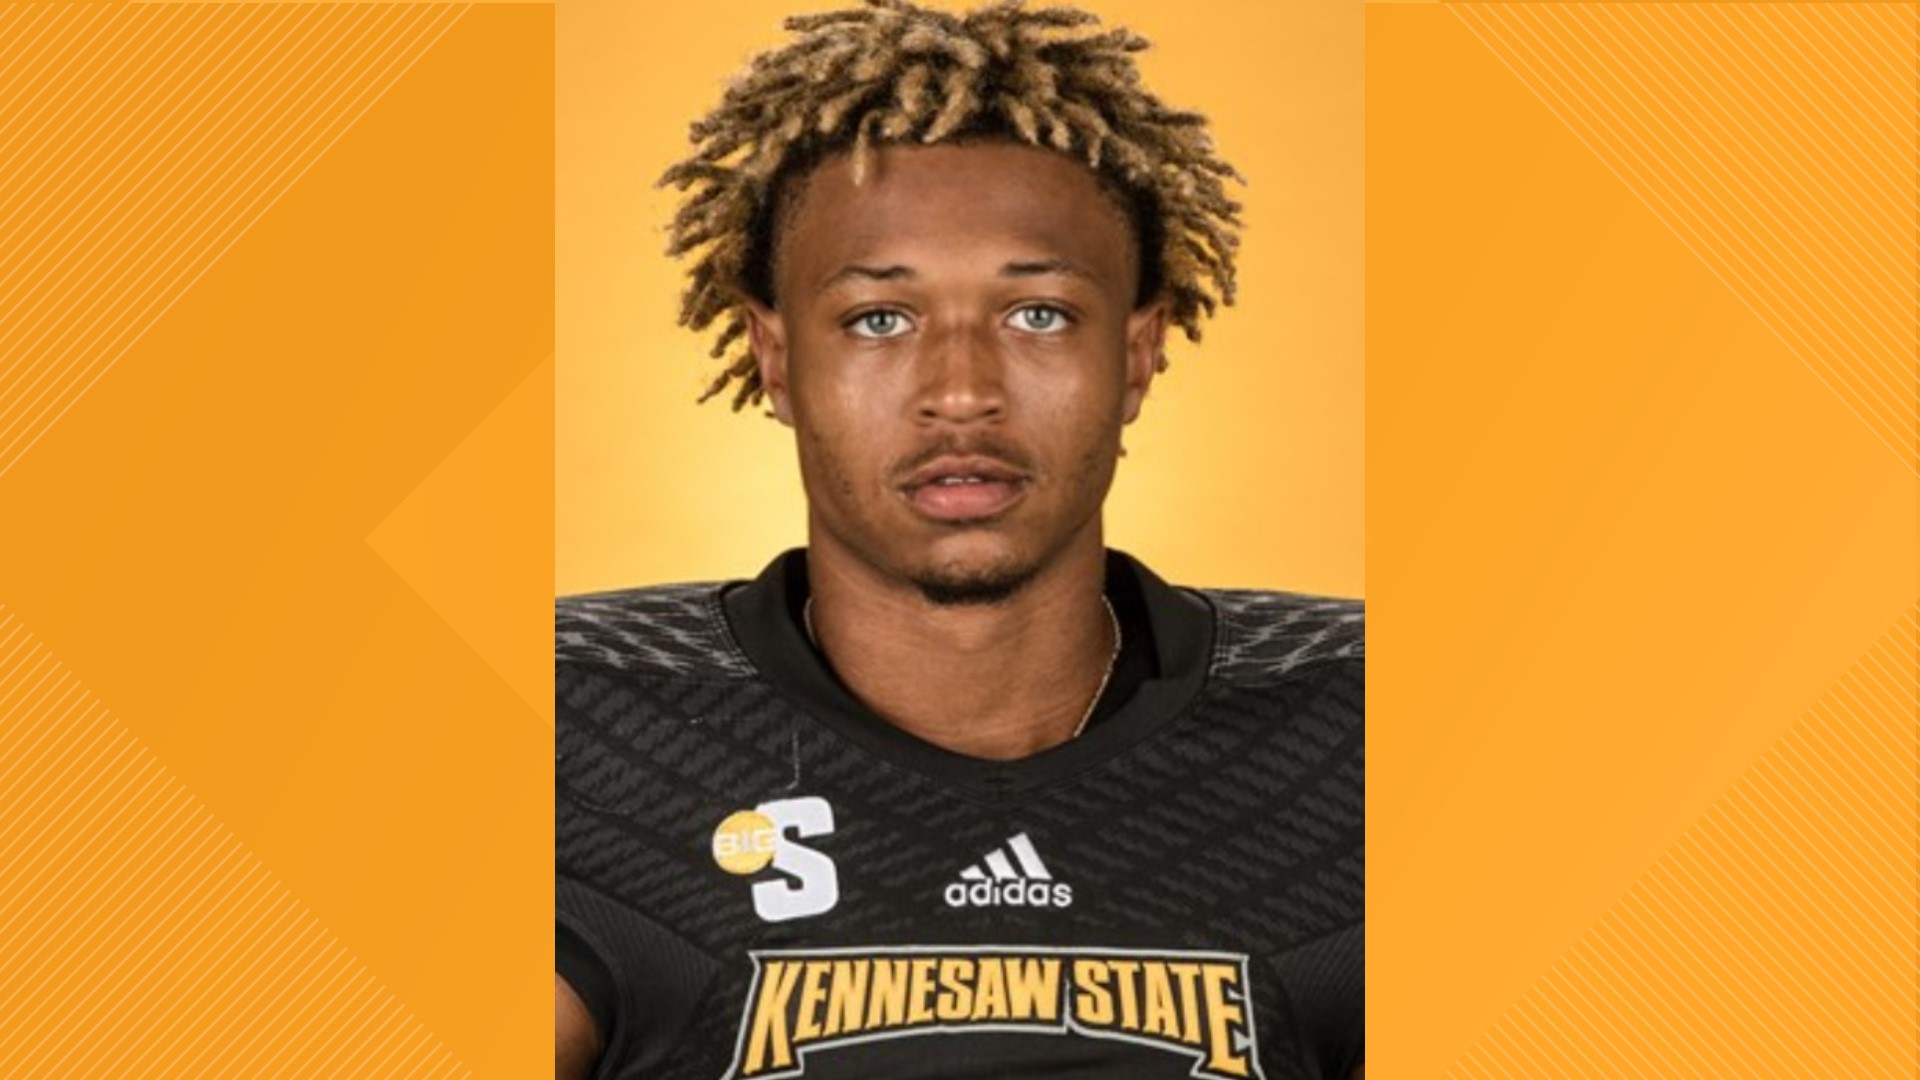 An 18-year-old Kennesaw State football player was killed and another person was injured after a shooting in Florida, according to deputies.